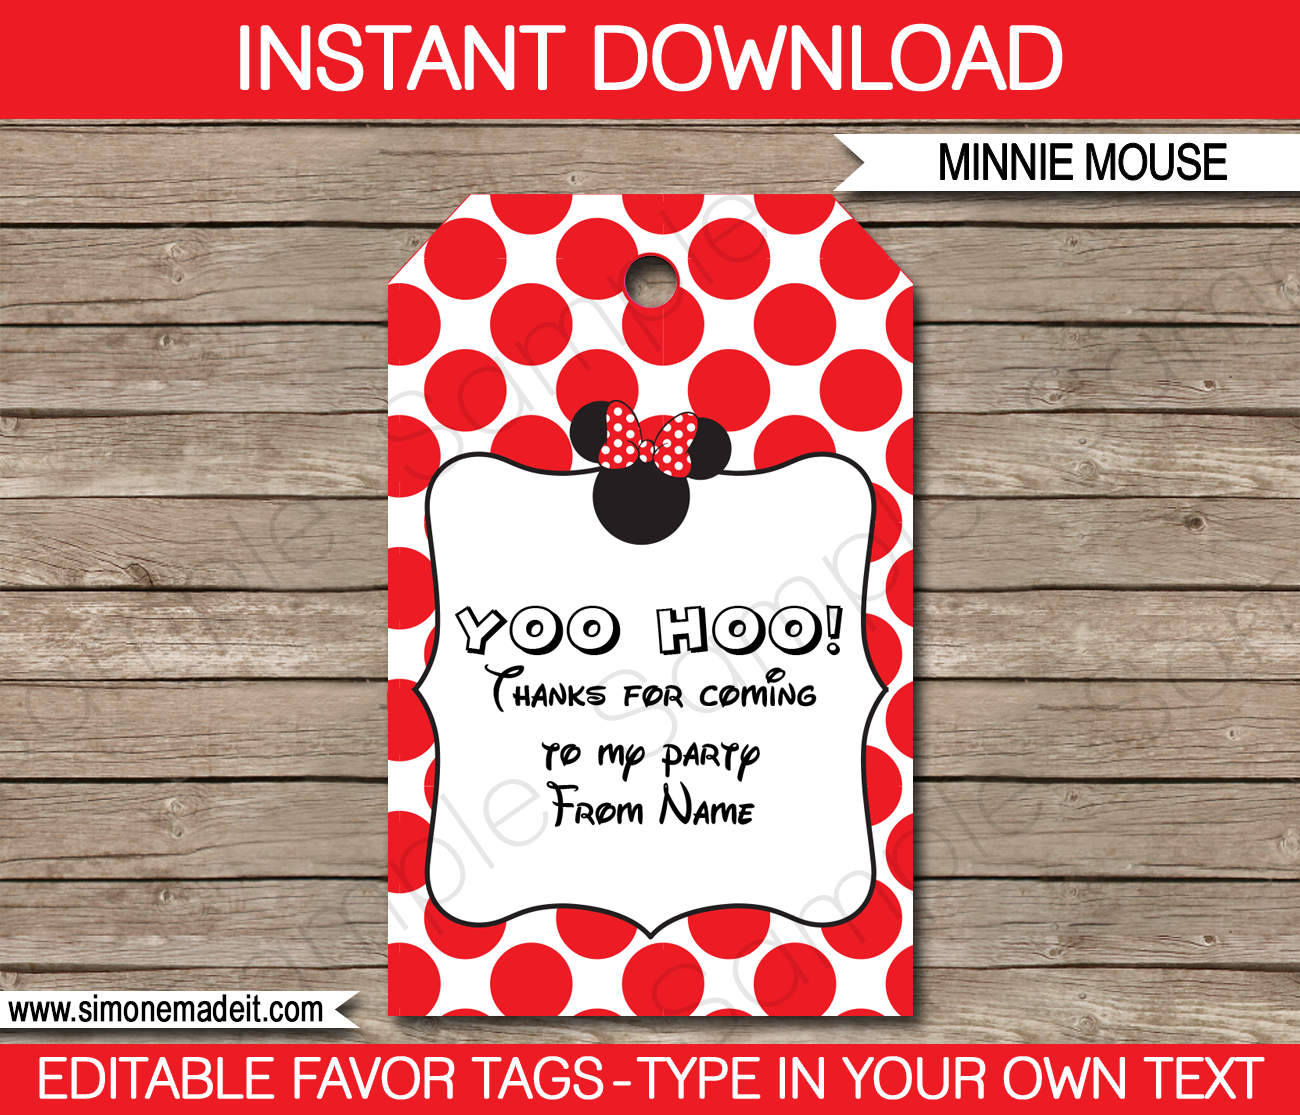 Red Minnie Mouse Birthday Party Favor Tags | Thank You Tags | Birthday Party | Editable DIY Template | $3.00 INSTANT DOWNLOAD via SIMONEmadeit.com